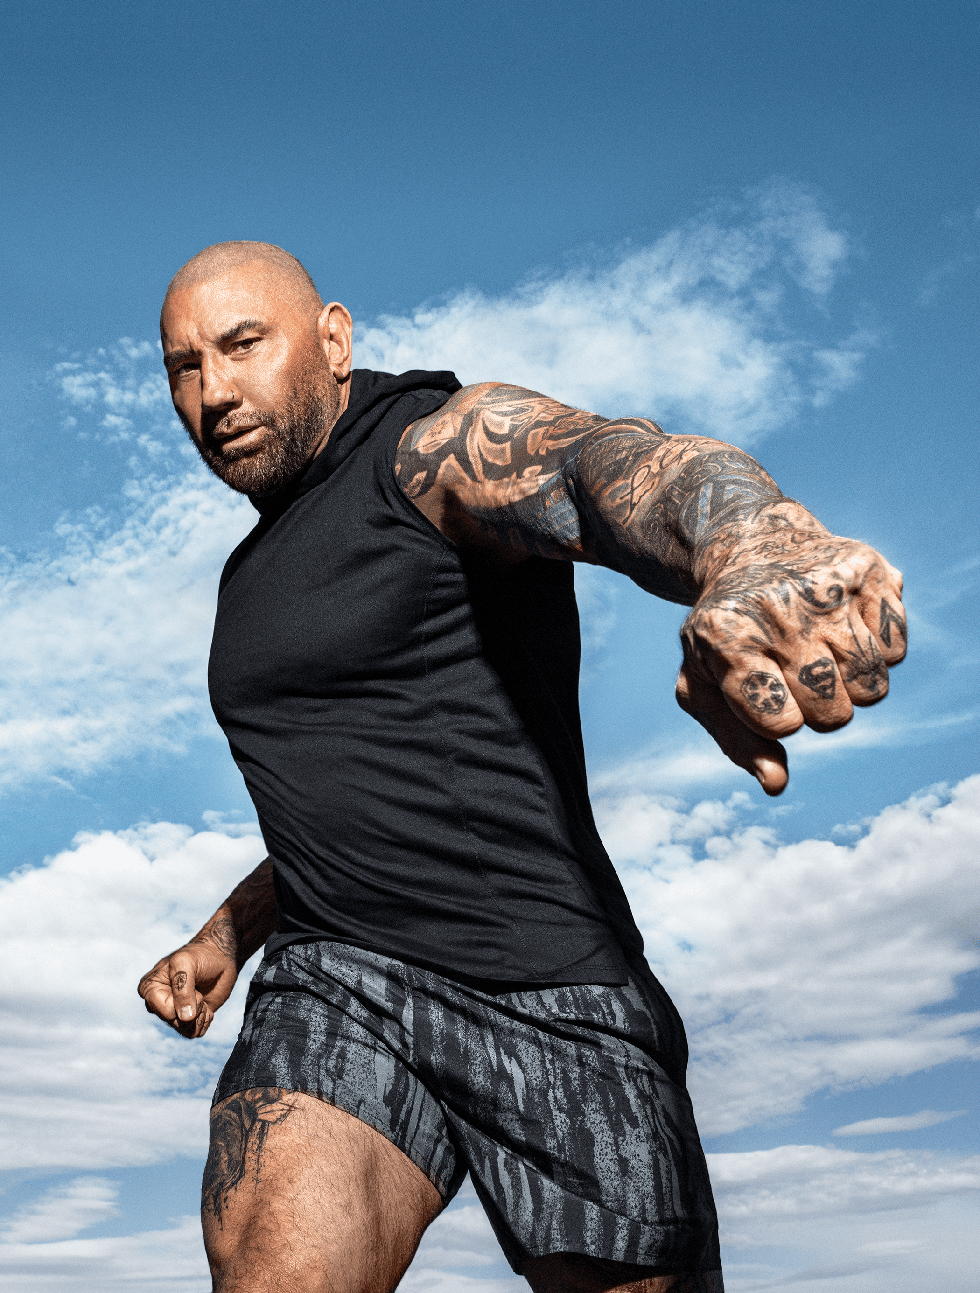 Why Dave Bautista Cried When 'Dune' Director Offered Him Role